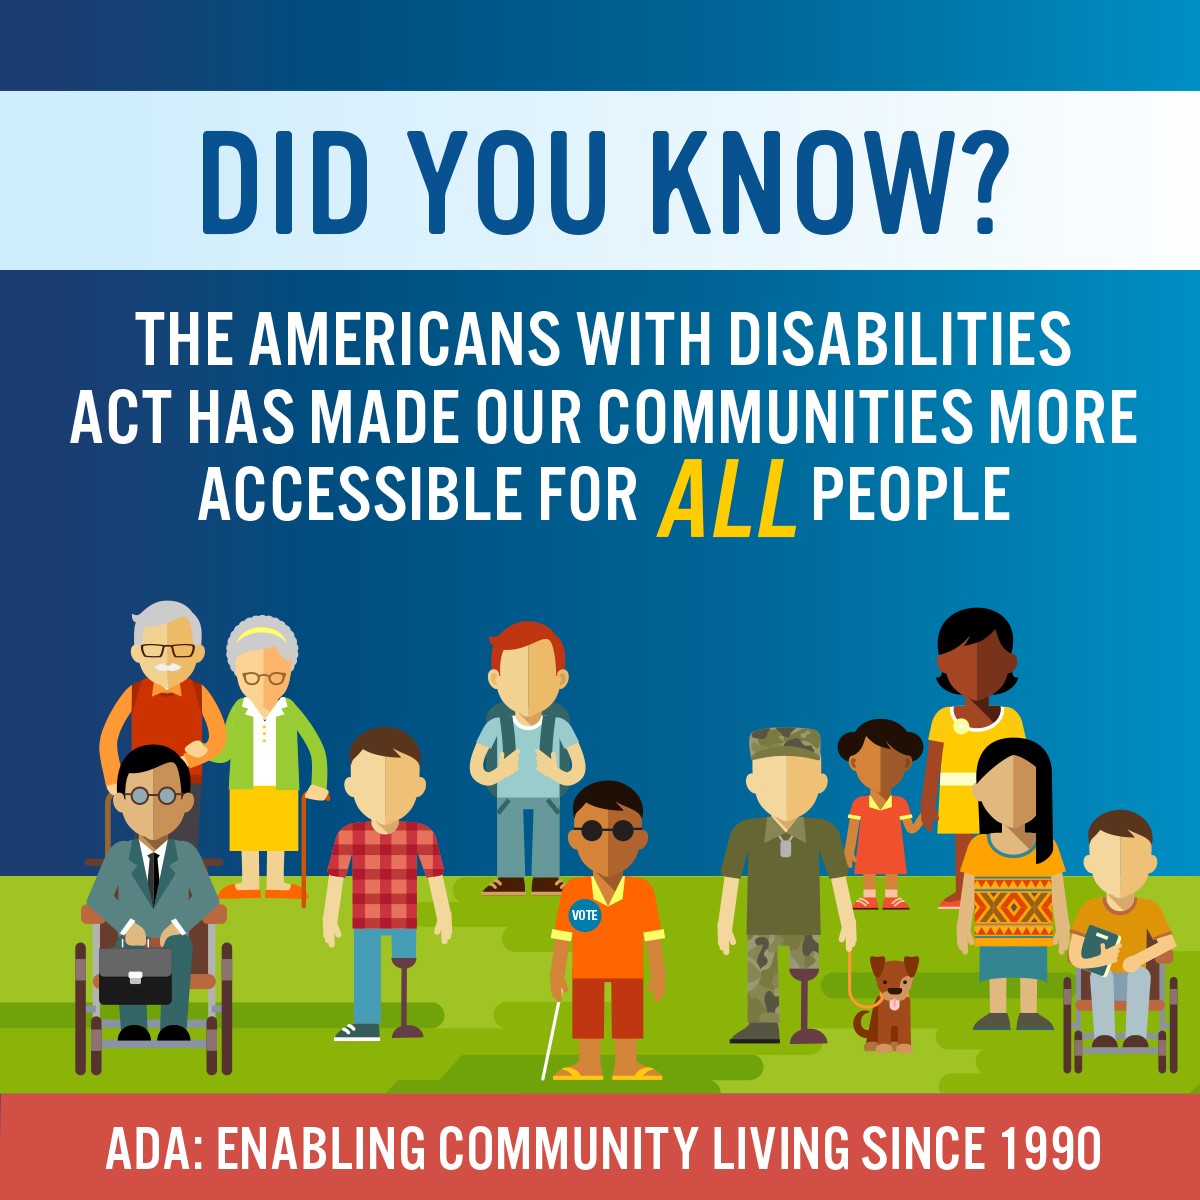 The ADA makes our communities accessible for all people